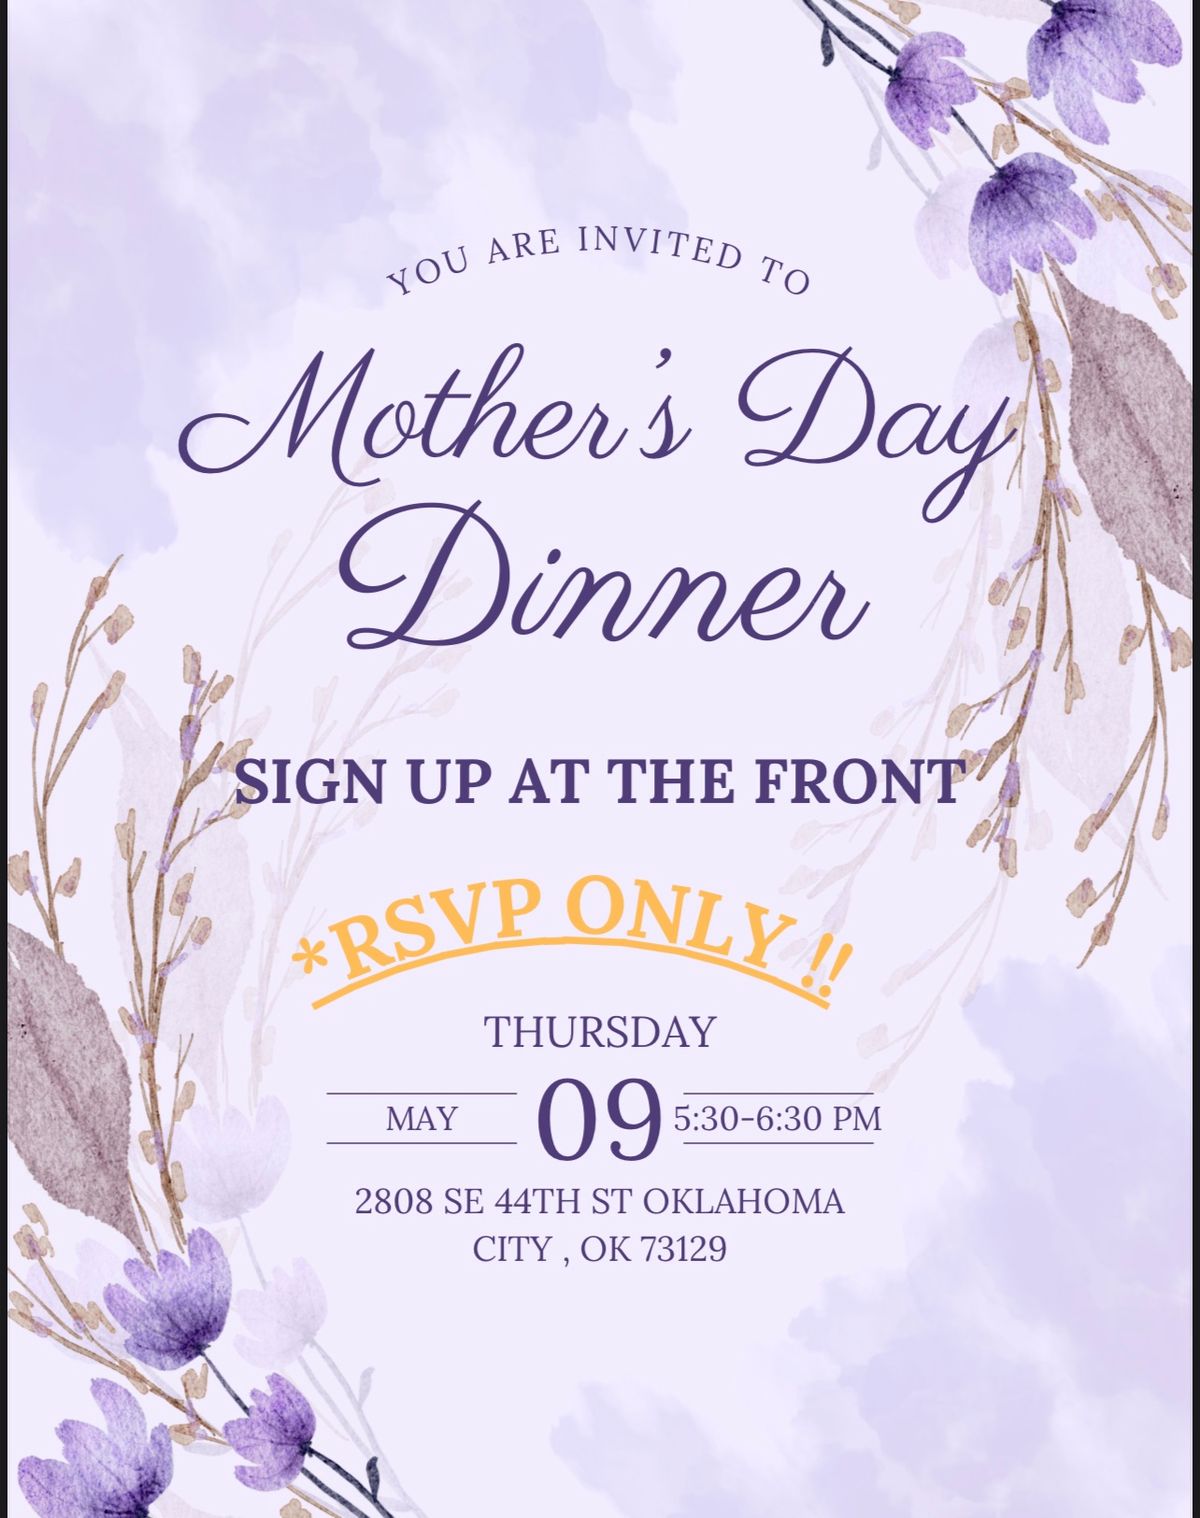 ?Mothers Day Dinner ?